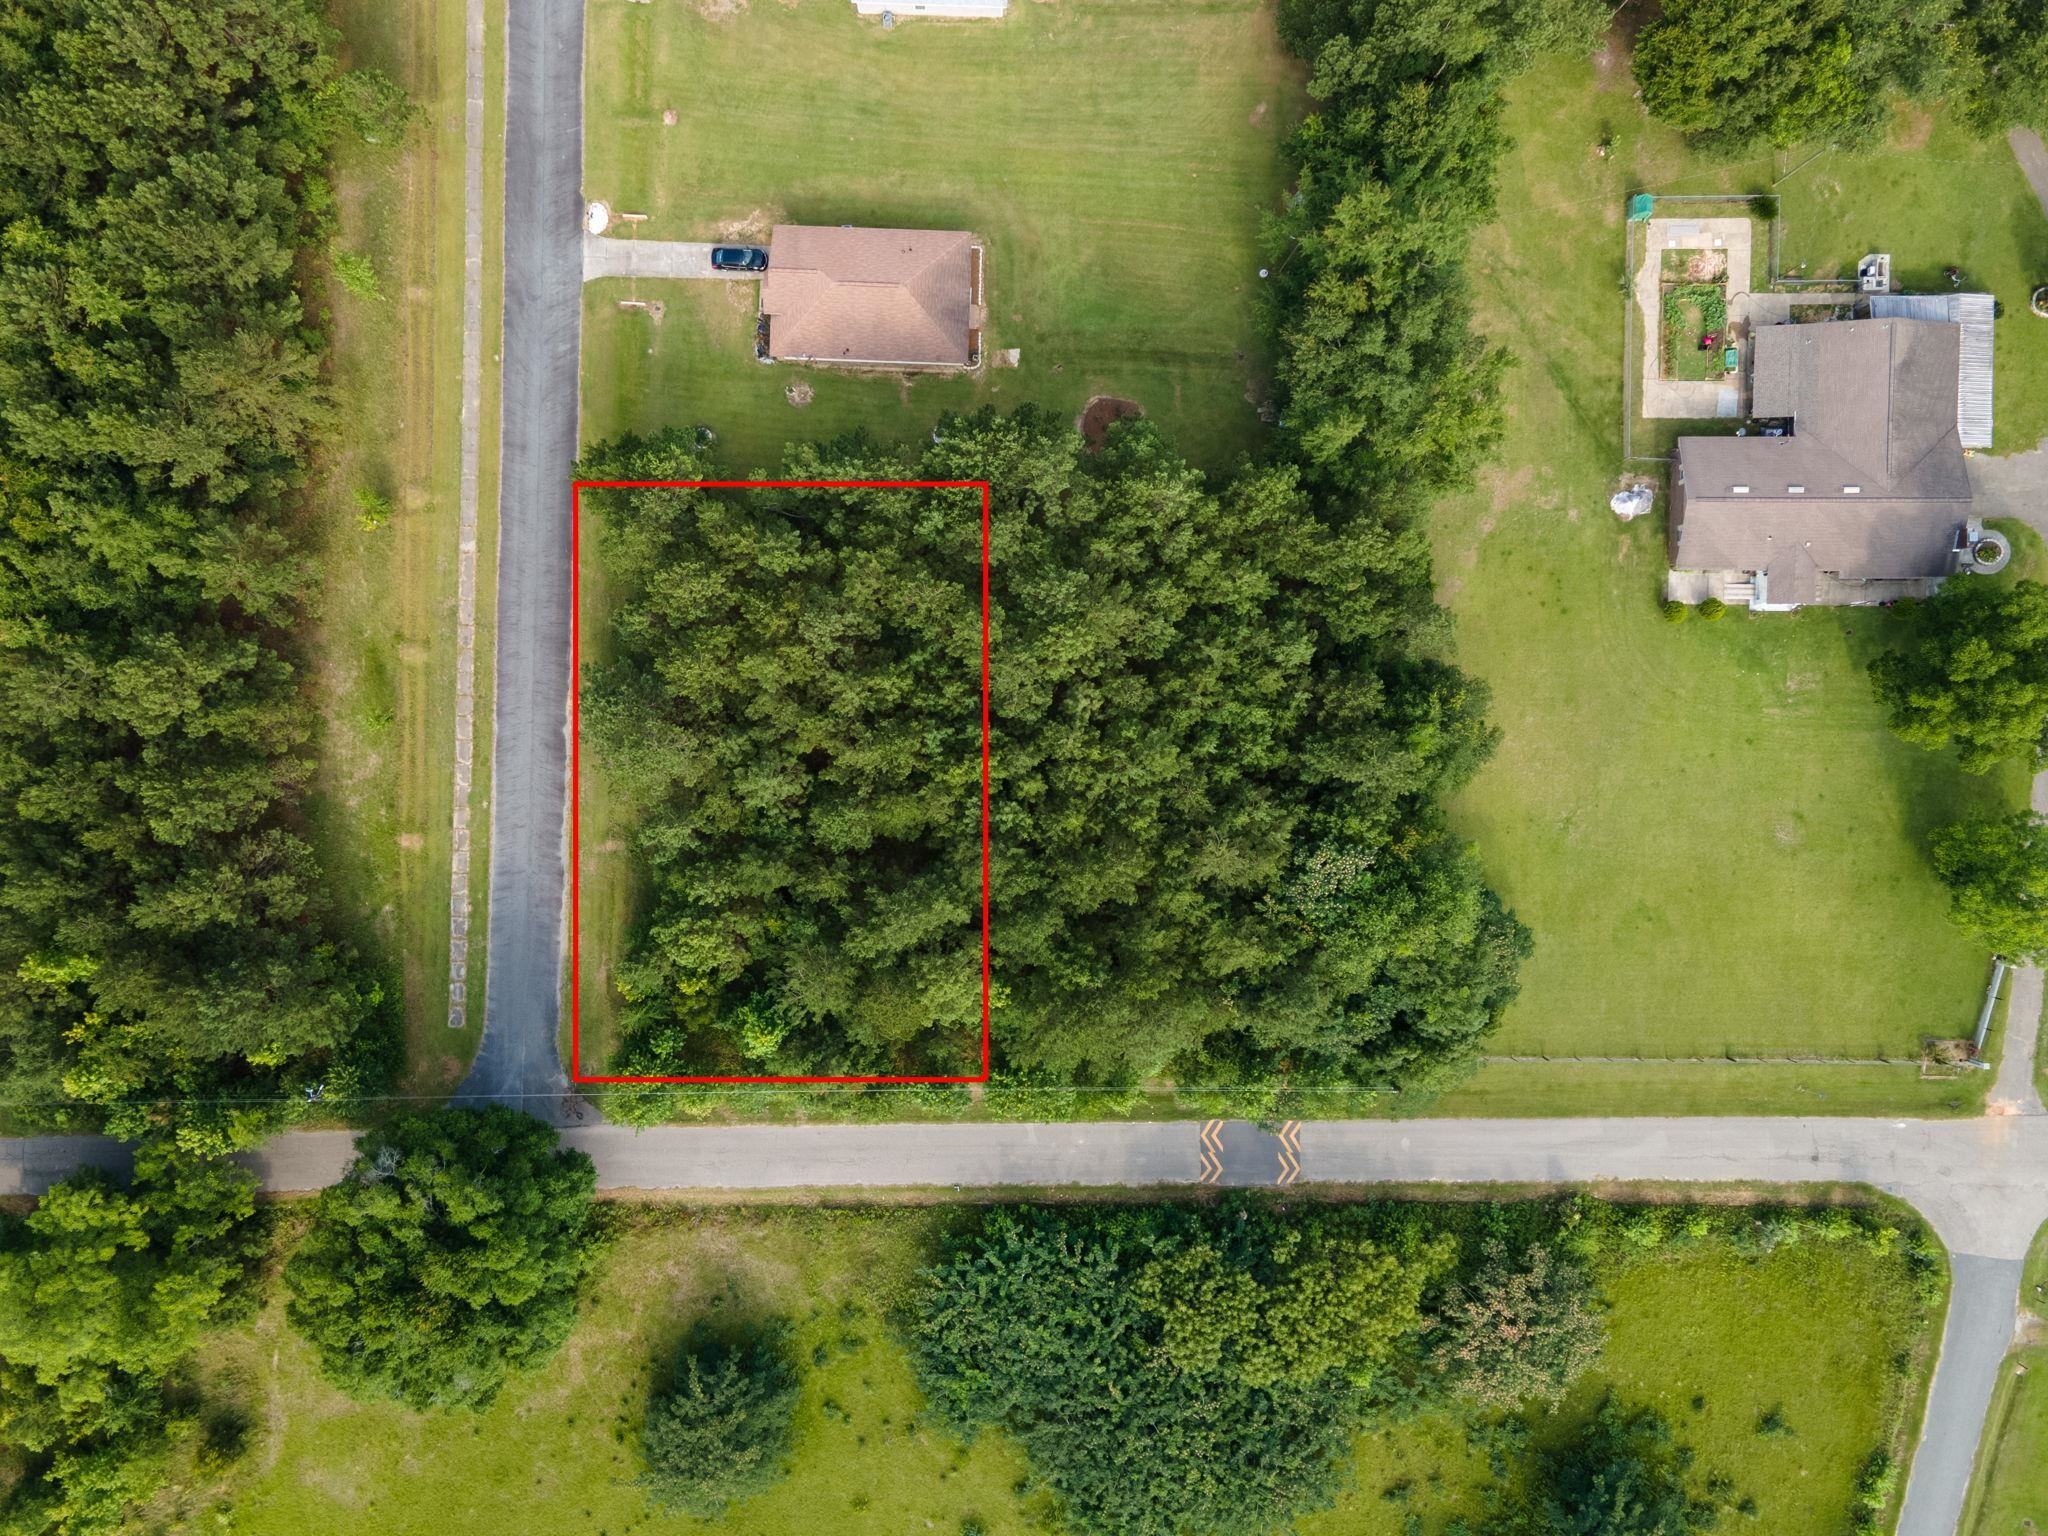 xxx Chesterfield,QUINCY,Florida 32351,Lots and land,Chesterfield,361230